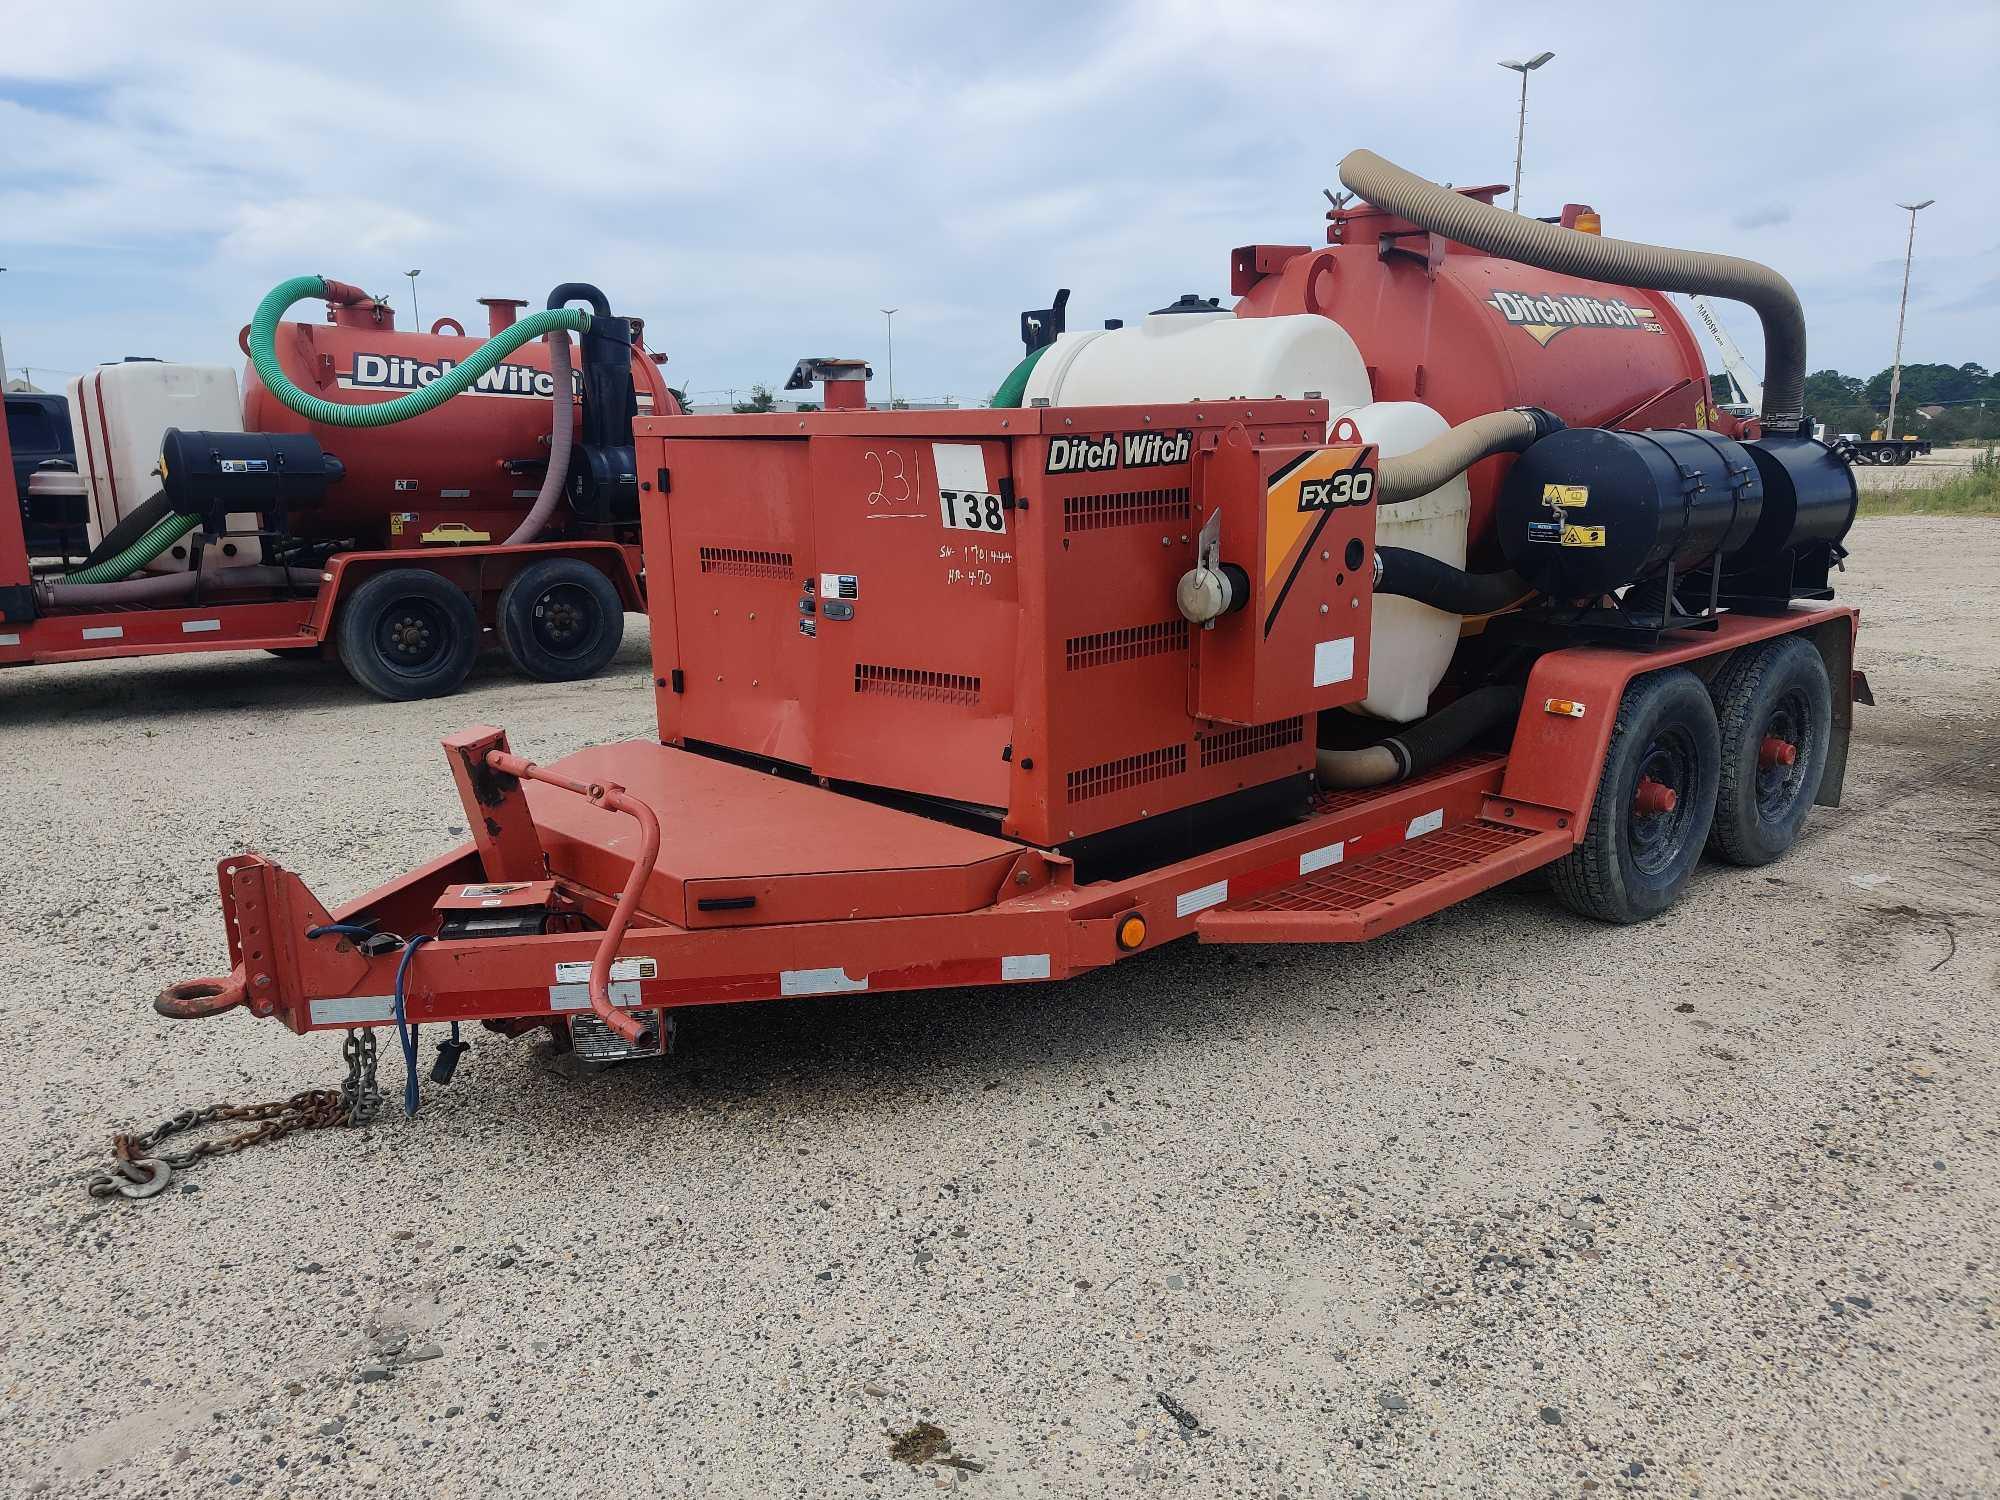 DITCH WITCH FX30 BORING EQUIPMENT SN:E1701444 Powered